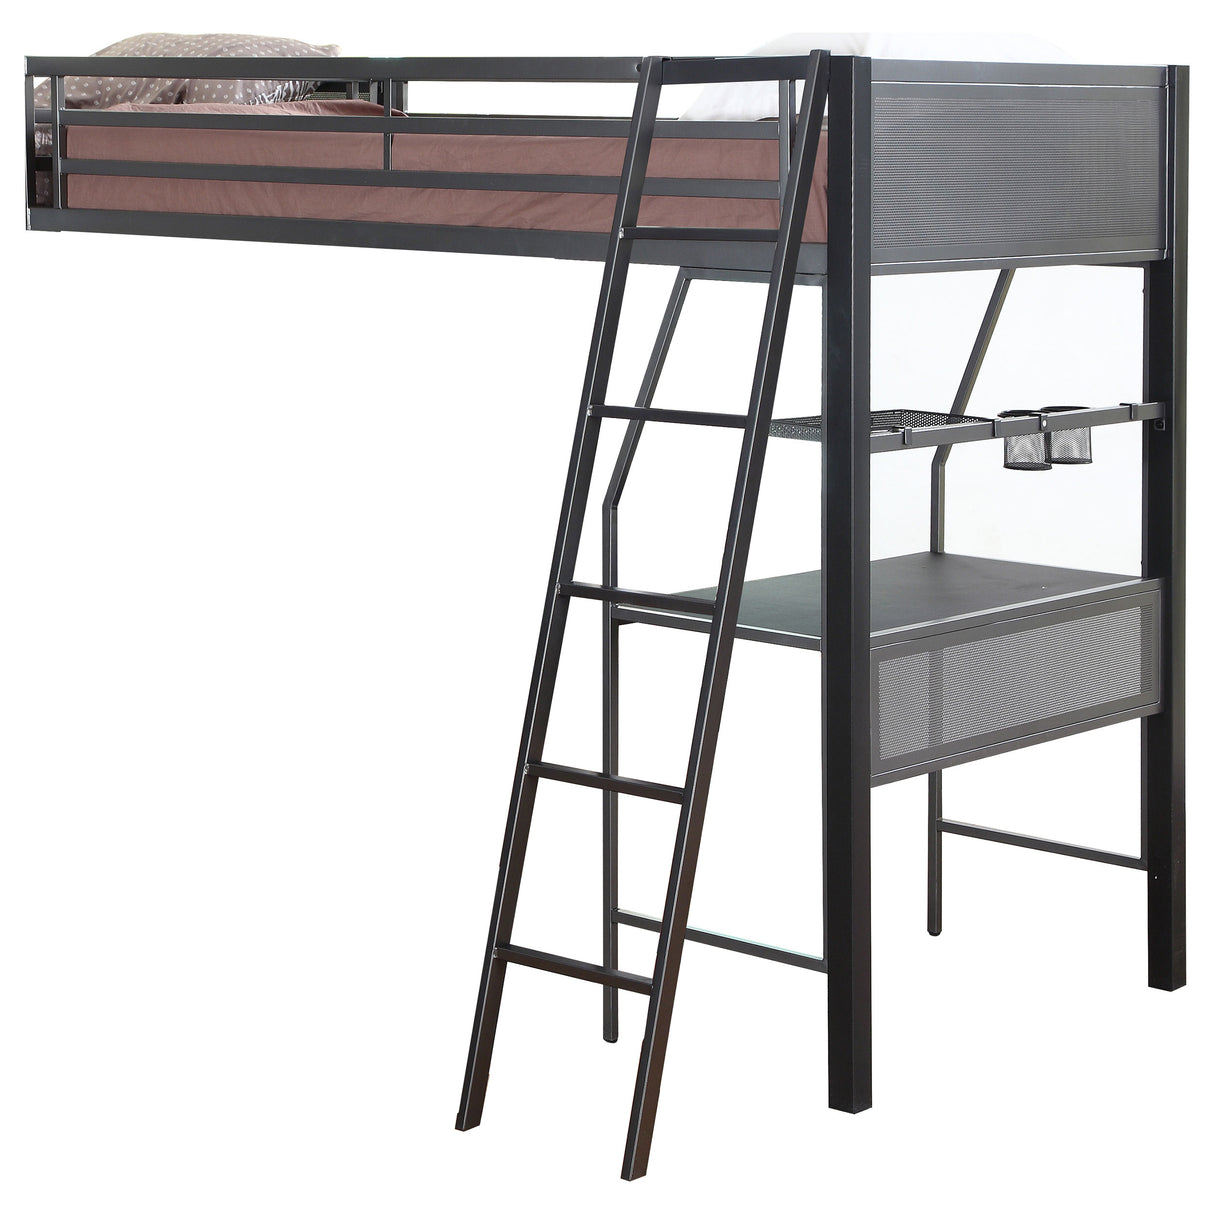 Twin / Full / Twin Triple Bunk Bed - Meyers 2-piece Metal Twin Over Full Bunk Bed Set Black and Gunmetal